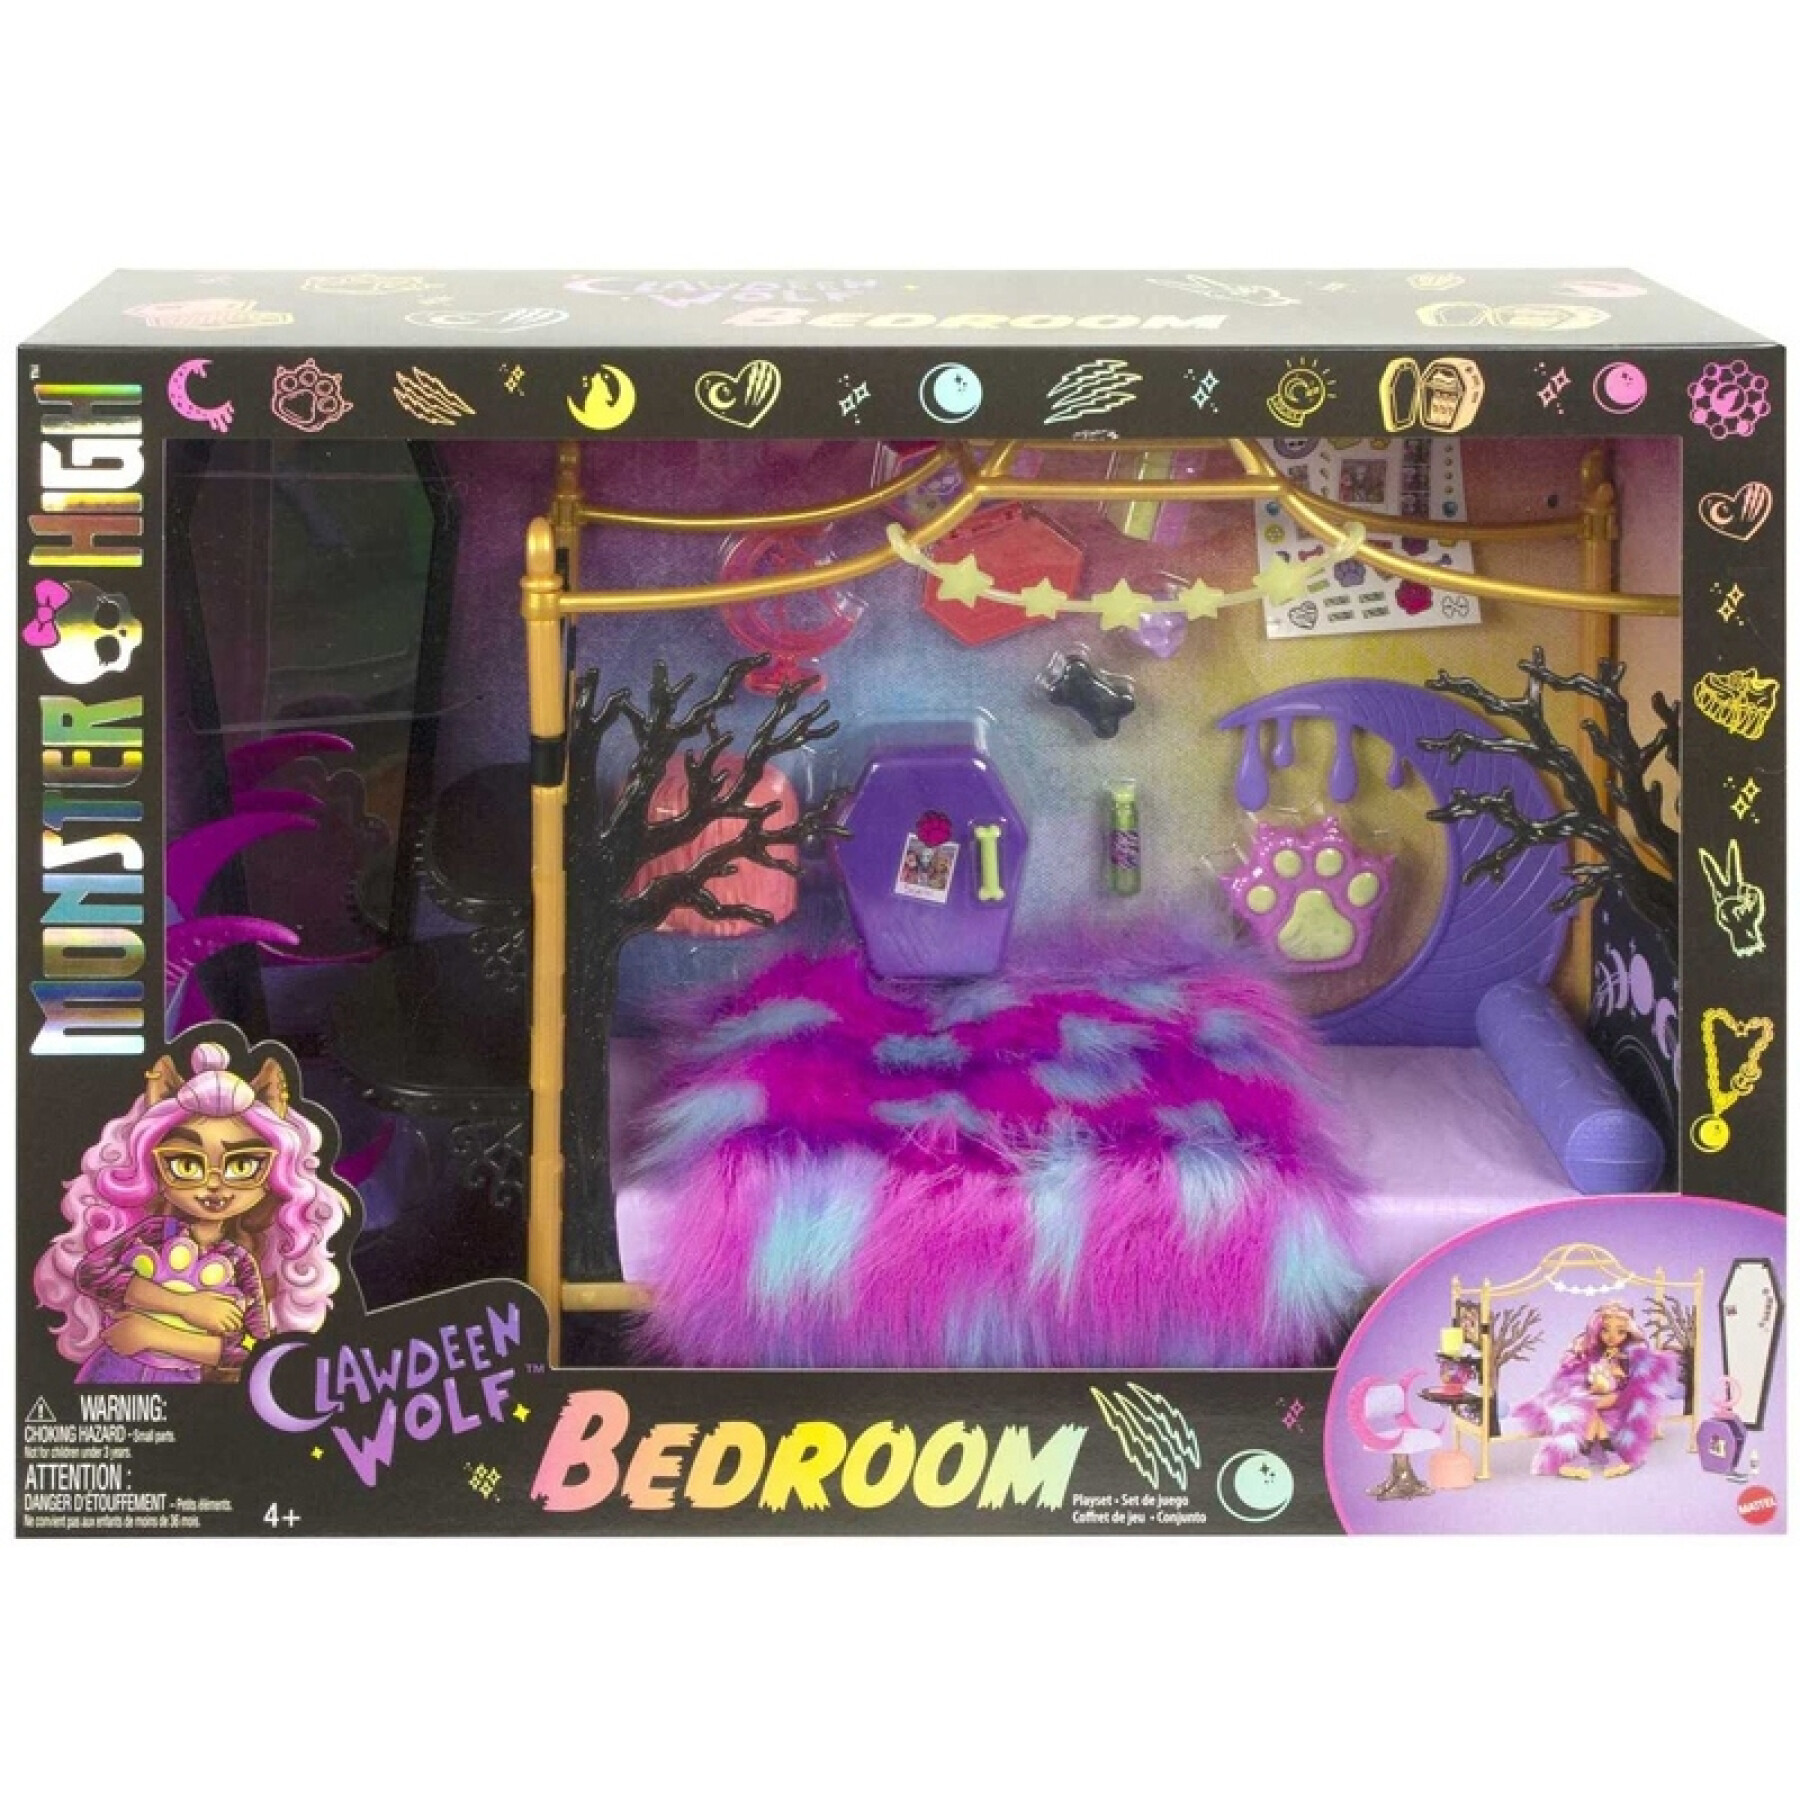 Accessories for clawdeen bedroom dolls Mattel France Monster High